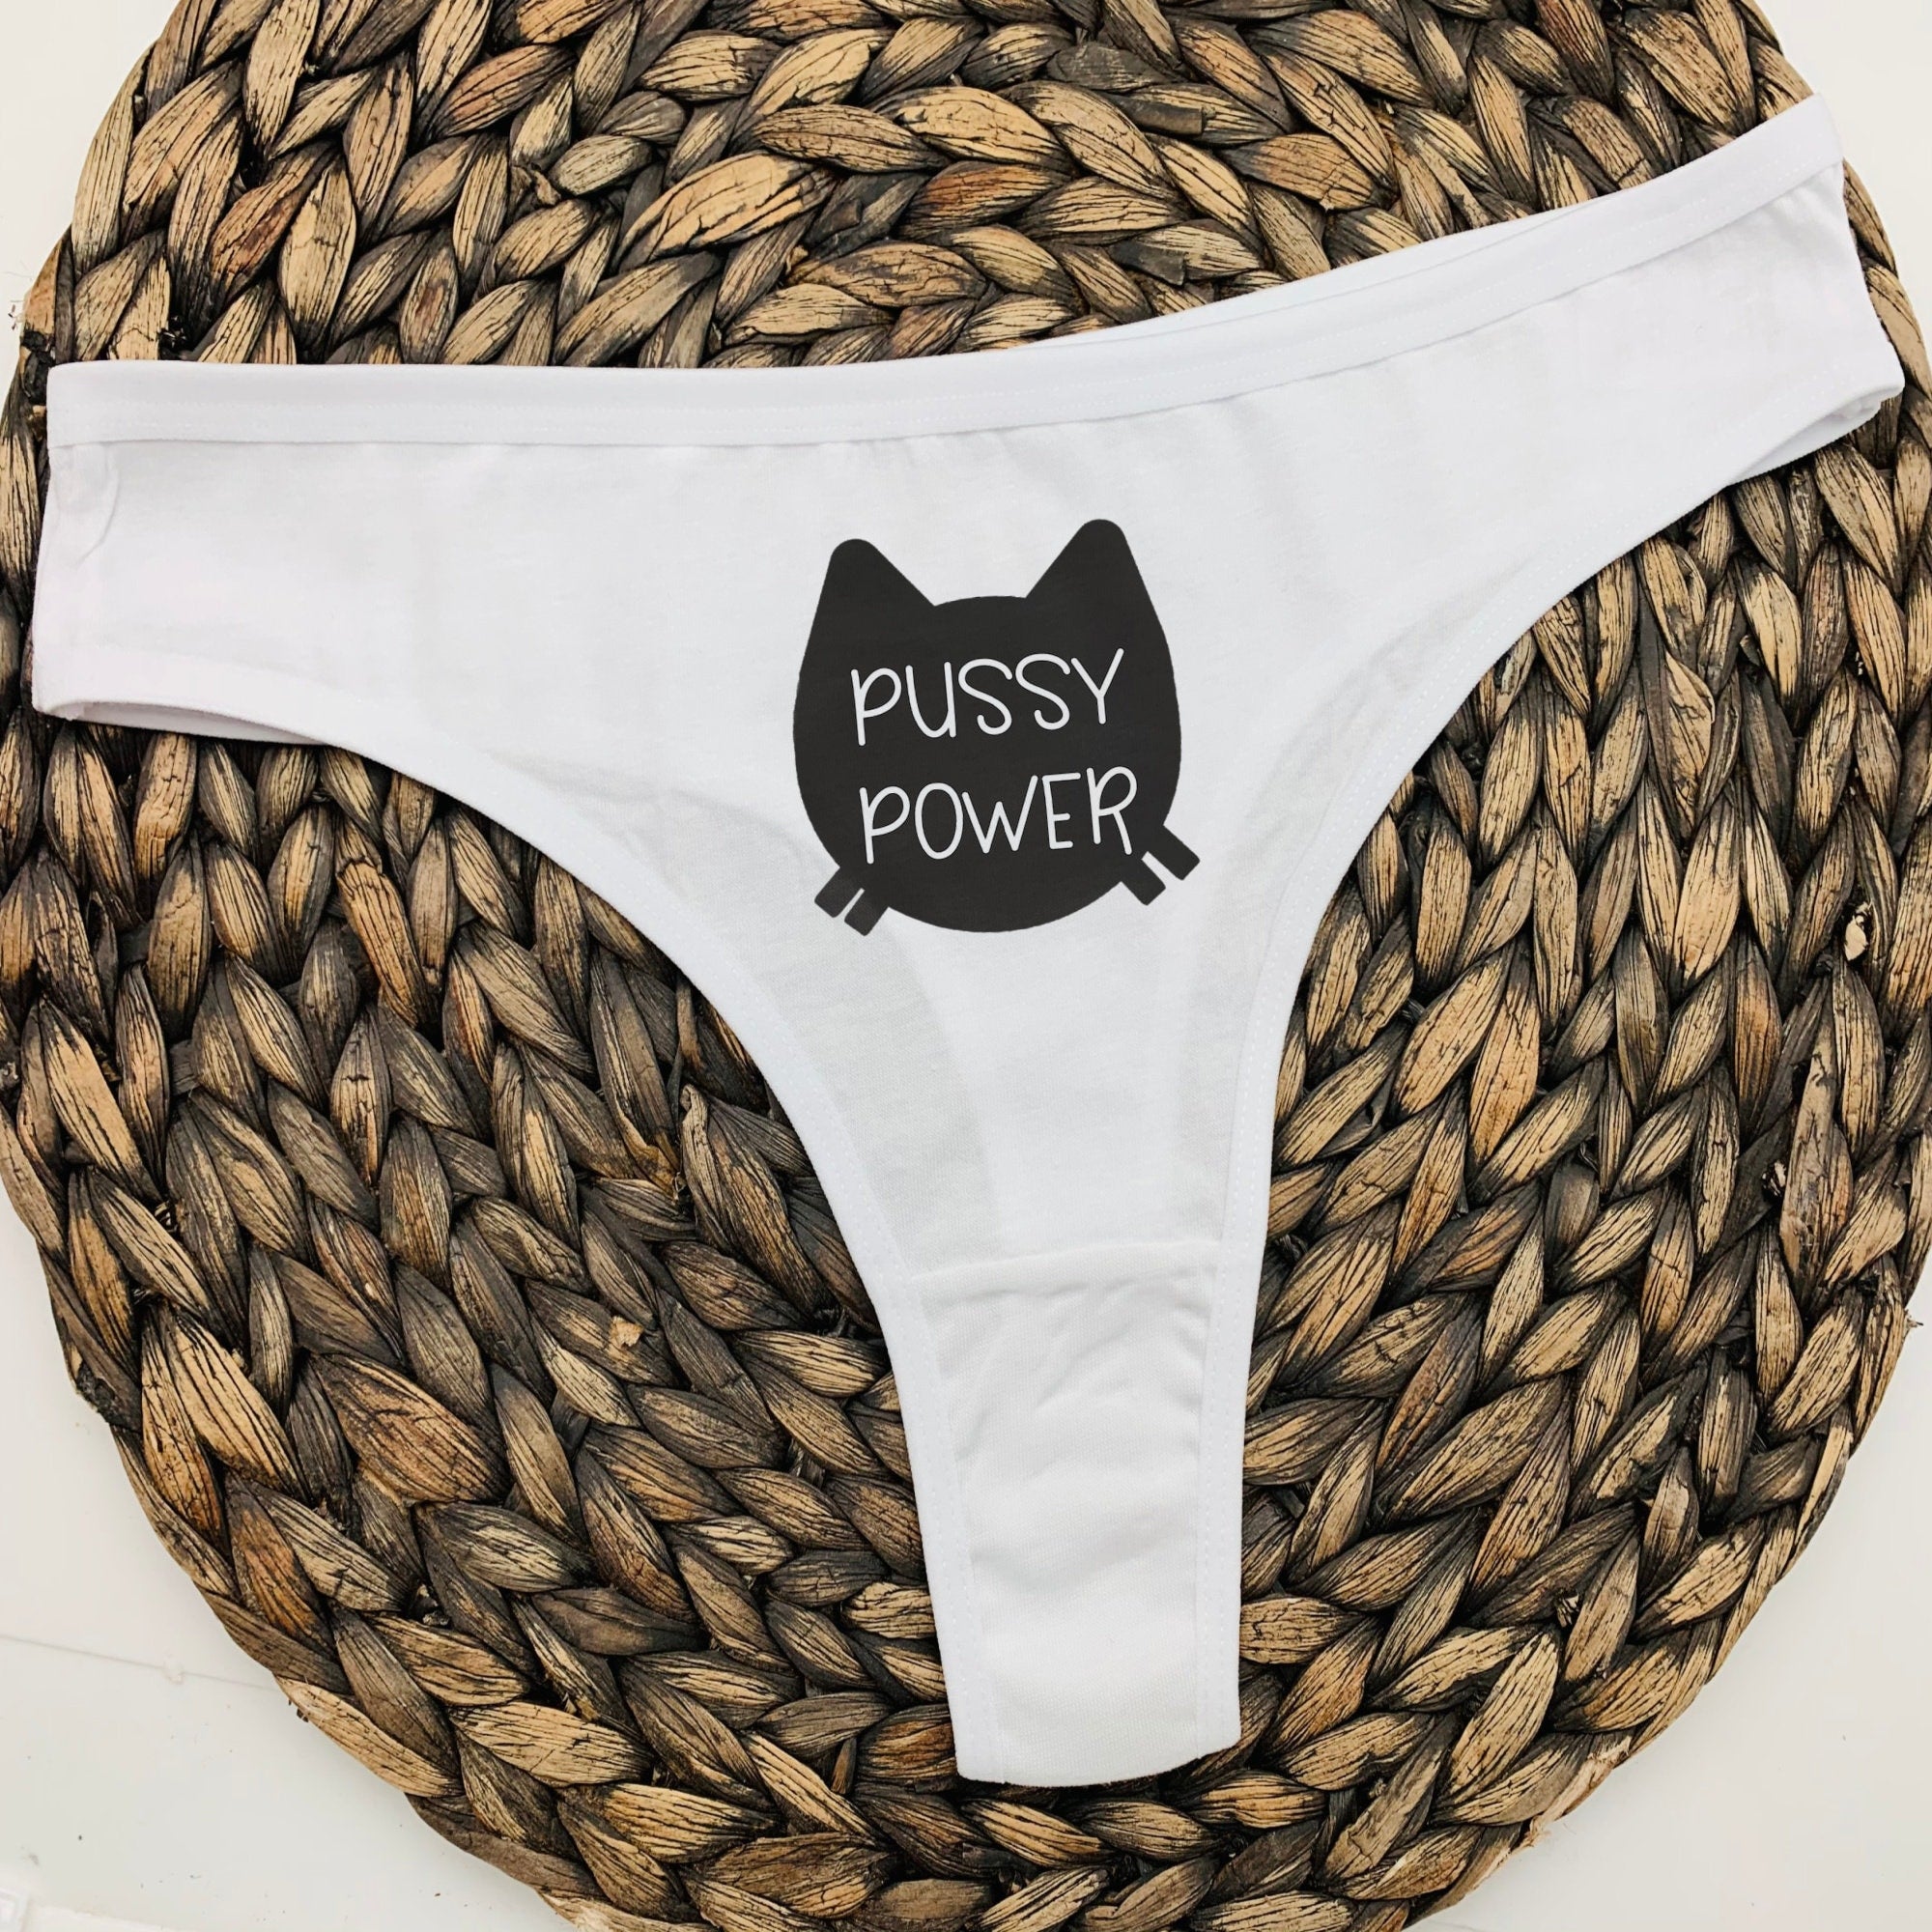 Funny Cat Thong - Pussy Power Lingerie - Empowering Humorous Underwear